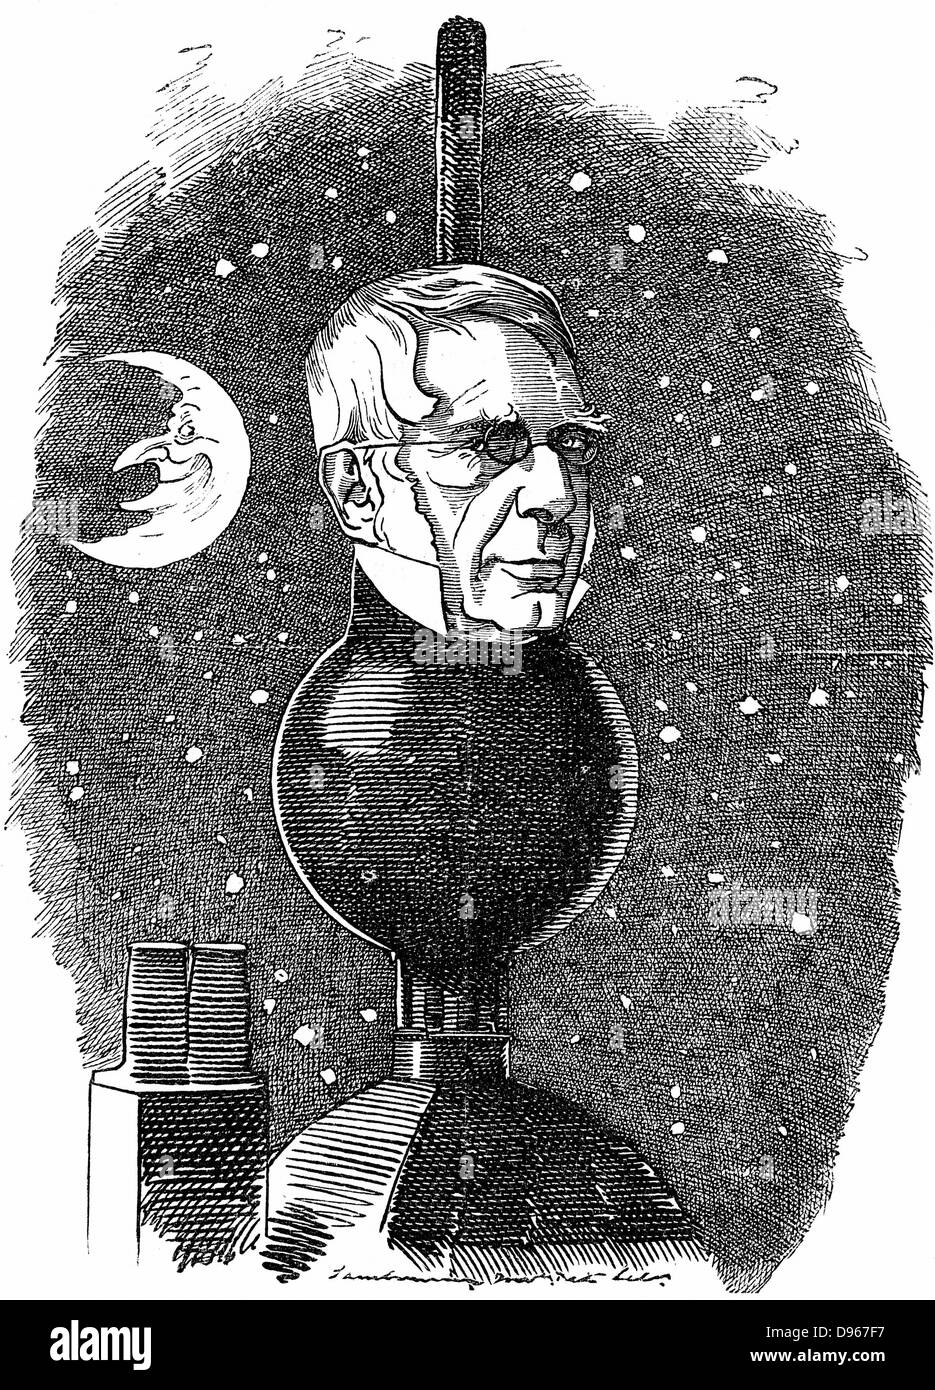 George Biddell Airy  (1801-1892) English astronomer and geophysicist. Astronomer Royal (183518-81). Richard Linley Sambourne cartoon in his 'Fancy Portraits' series from 'Punch' London  May 1883 showing Airy on turret of Flamsteed House, Greenwich (Royal Stock Photo